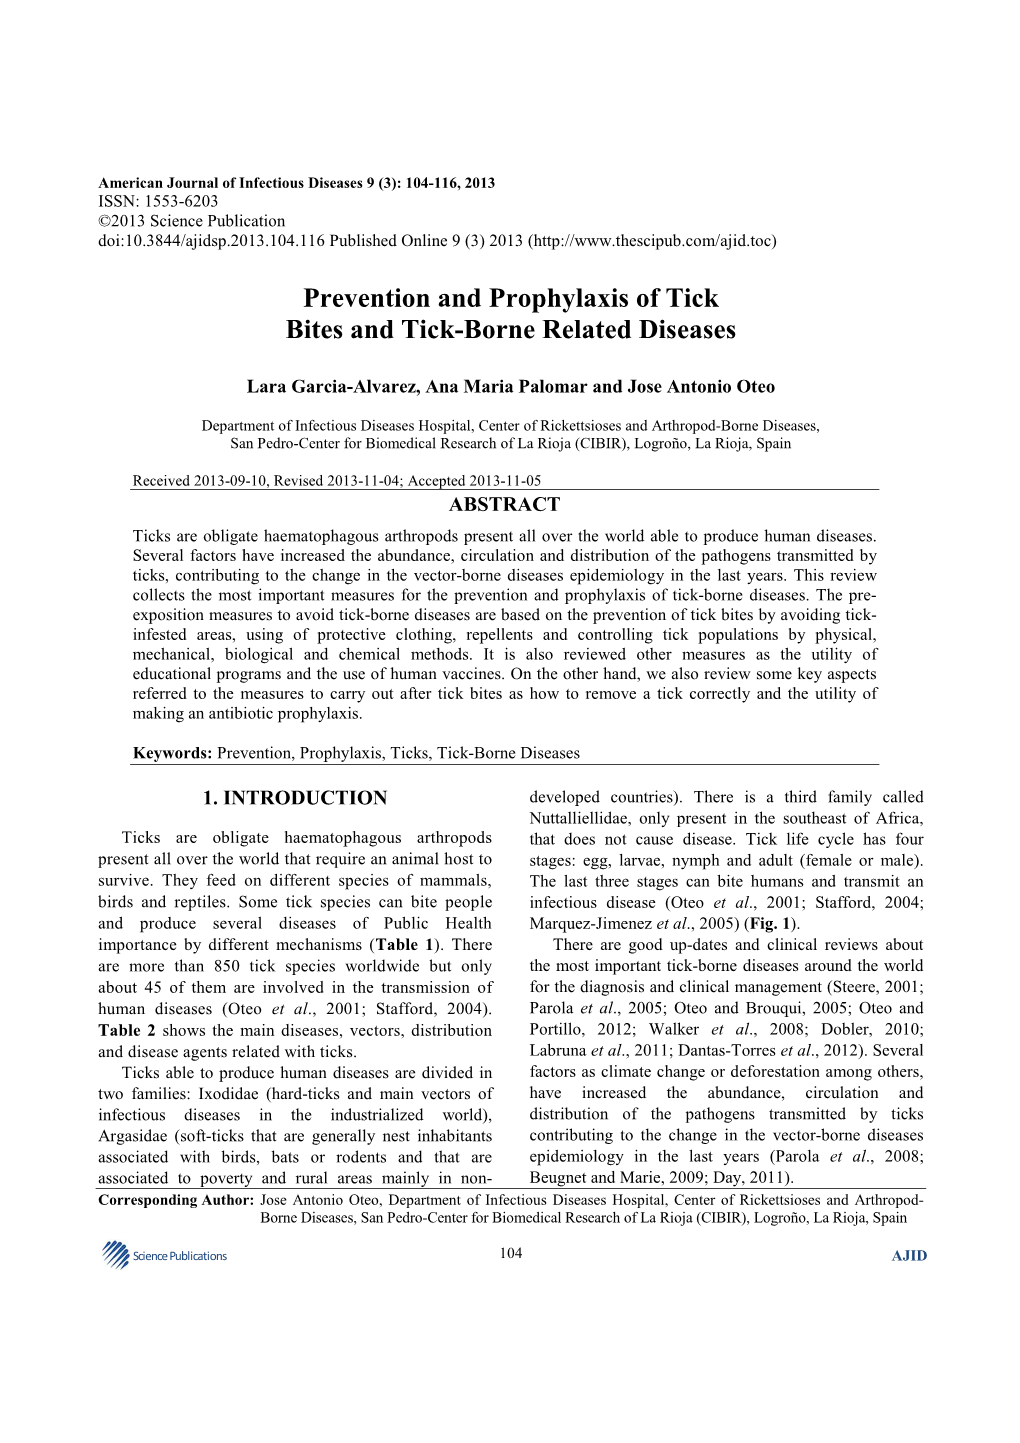 Prevention and Prophylaxis of Tick Bites and Tick-Borne Related Diseases